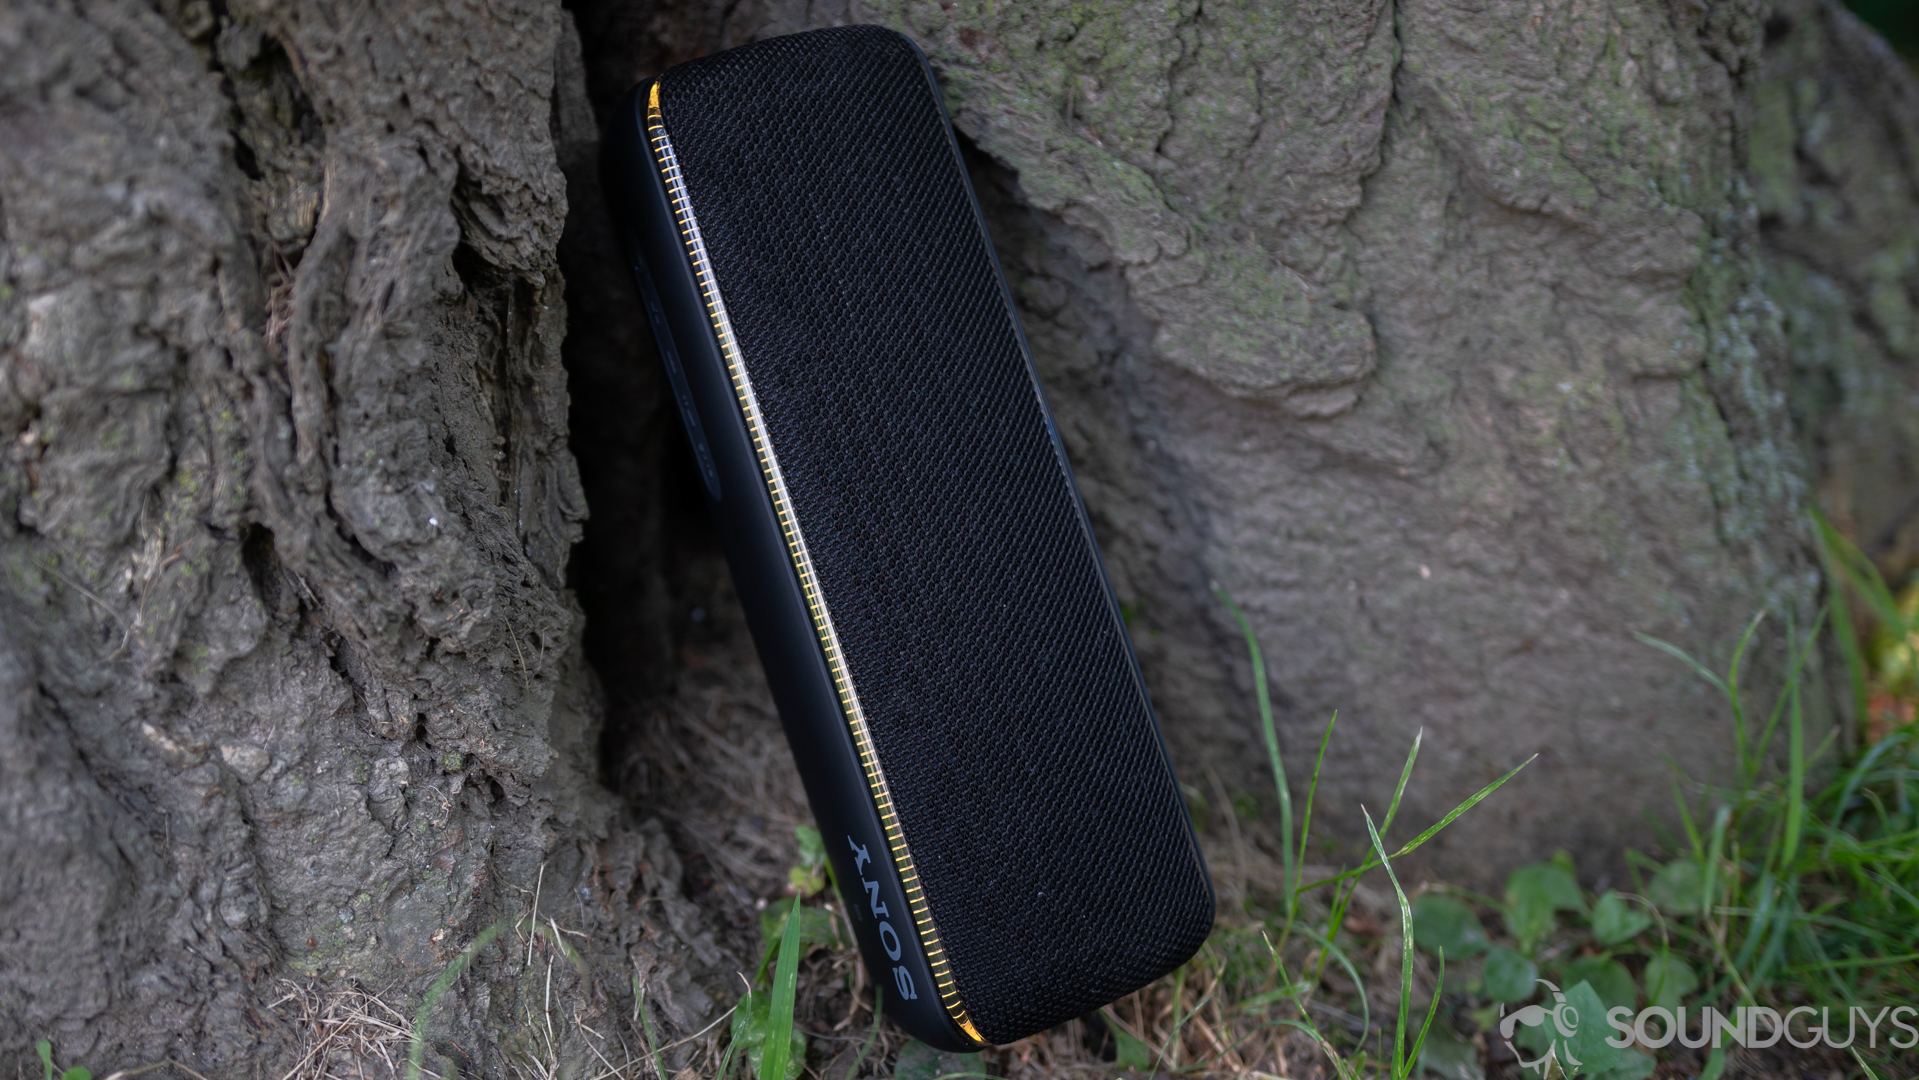 A picture of the Sony SRS-XB32, not quite the best outdoor speakers, leaning against a tree with its colorful lights turned on.